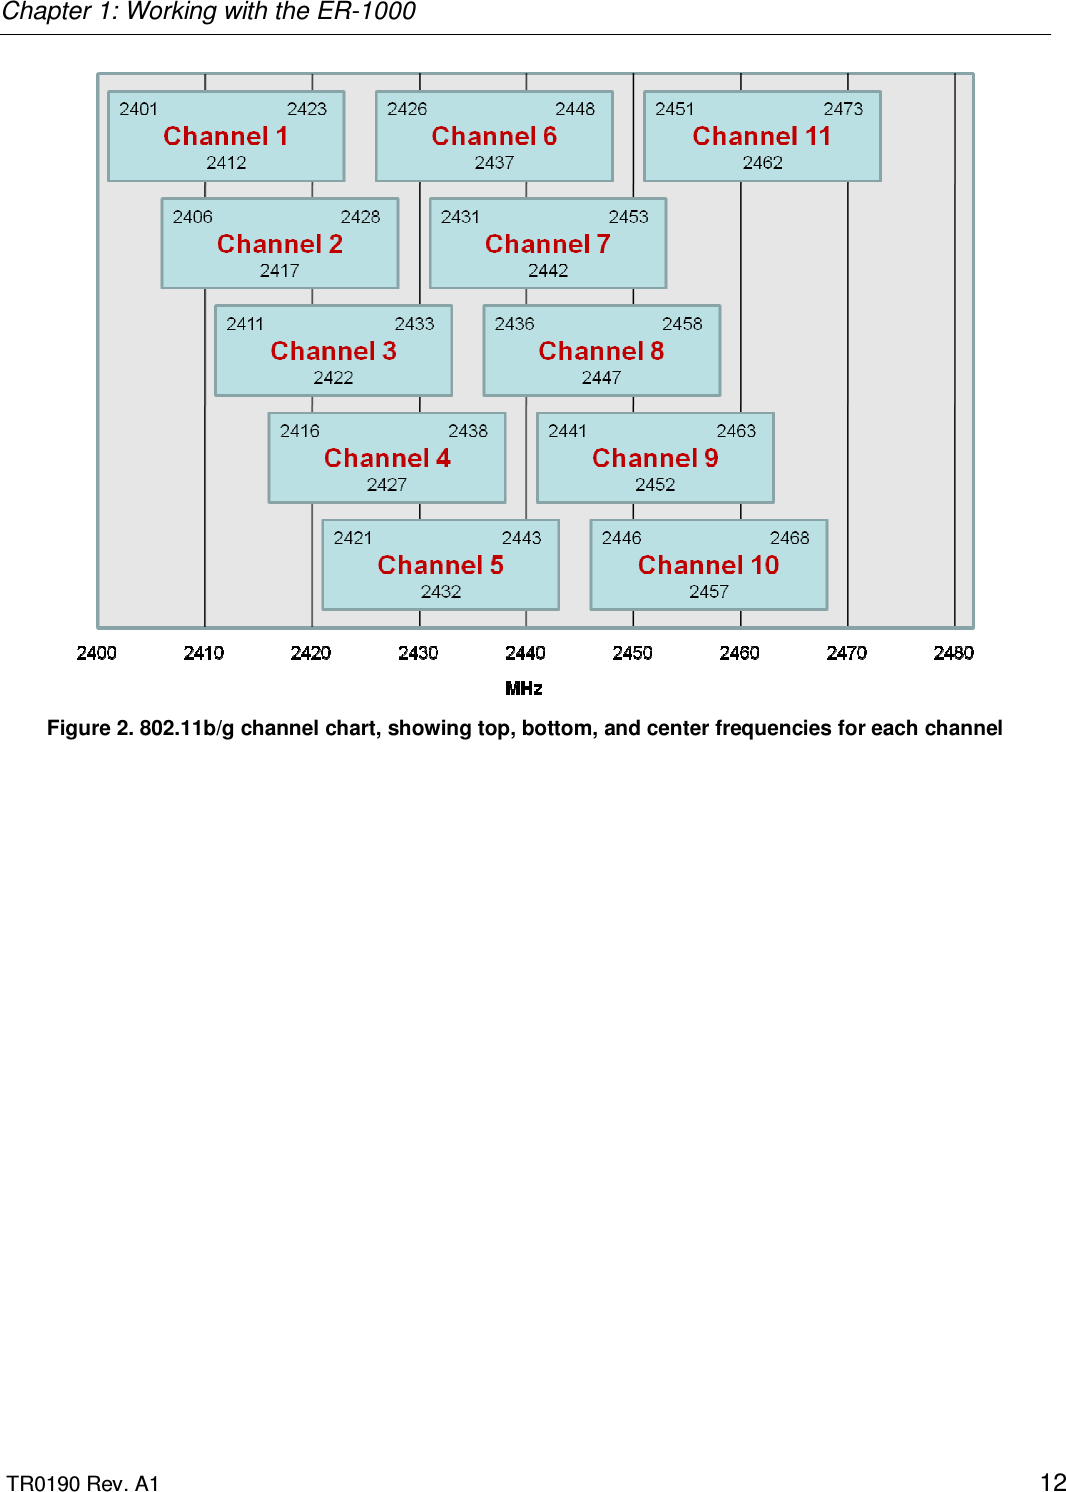 Chapter 1: Working with the ER-1000  TR0190 Rev. A1    12  Figure 2. 802.11b/g channel chart, showing top, bottom, and center frequencies for each channel  